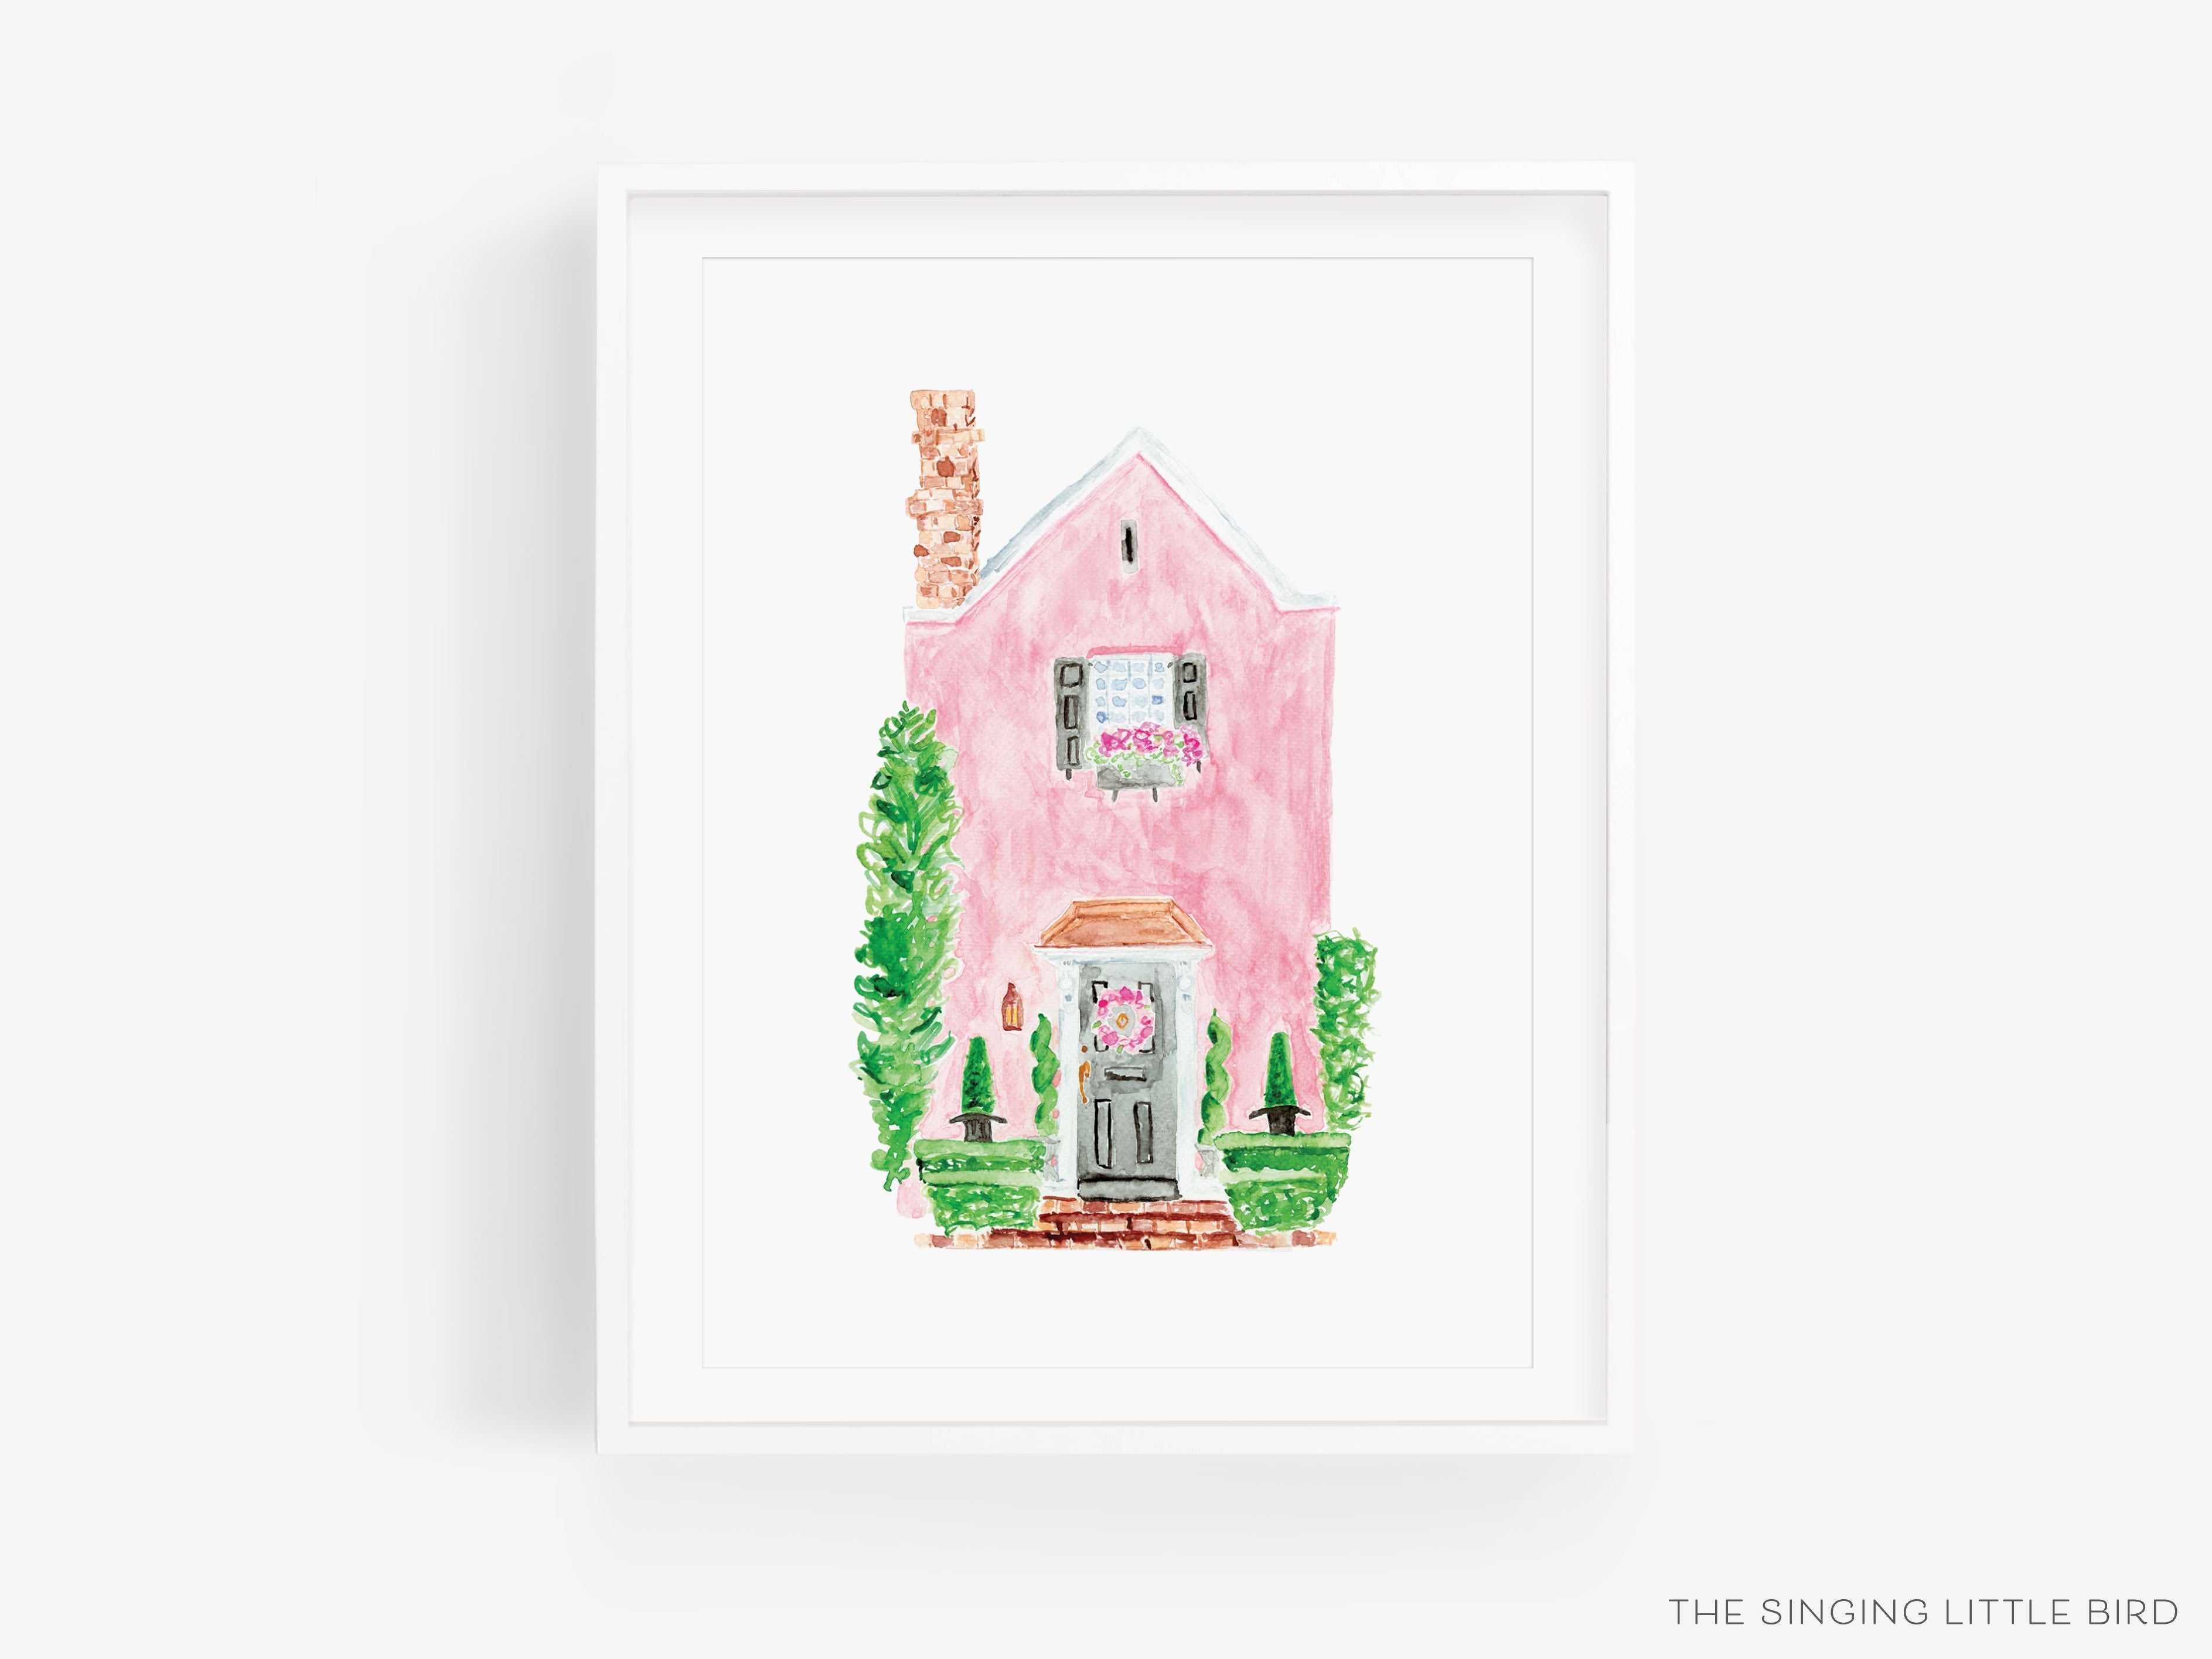 Pink Charleston SC House Art Print-This watercolor art print features our hand-painted pink Charleston, SC townhome, printed in the USA on 120lb high quality art paper. This makes a great gift or wall decor for the pastel house lover in your life.-The Singing Little Bird